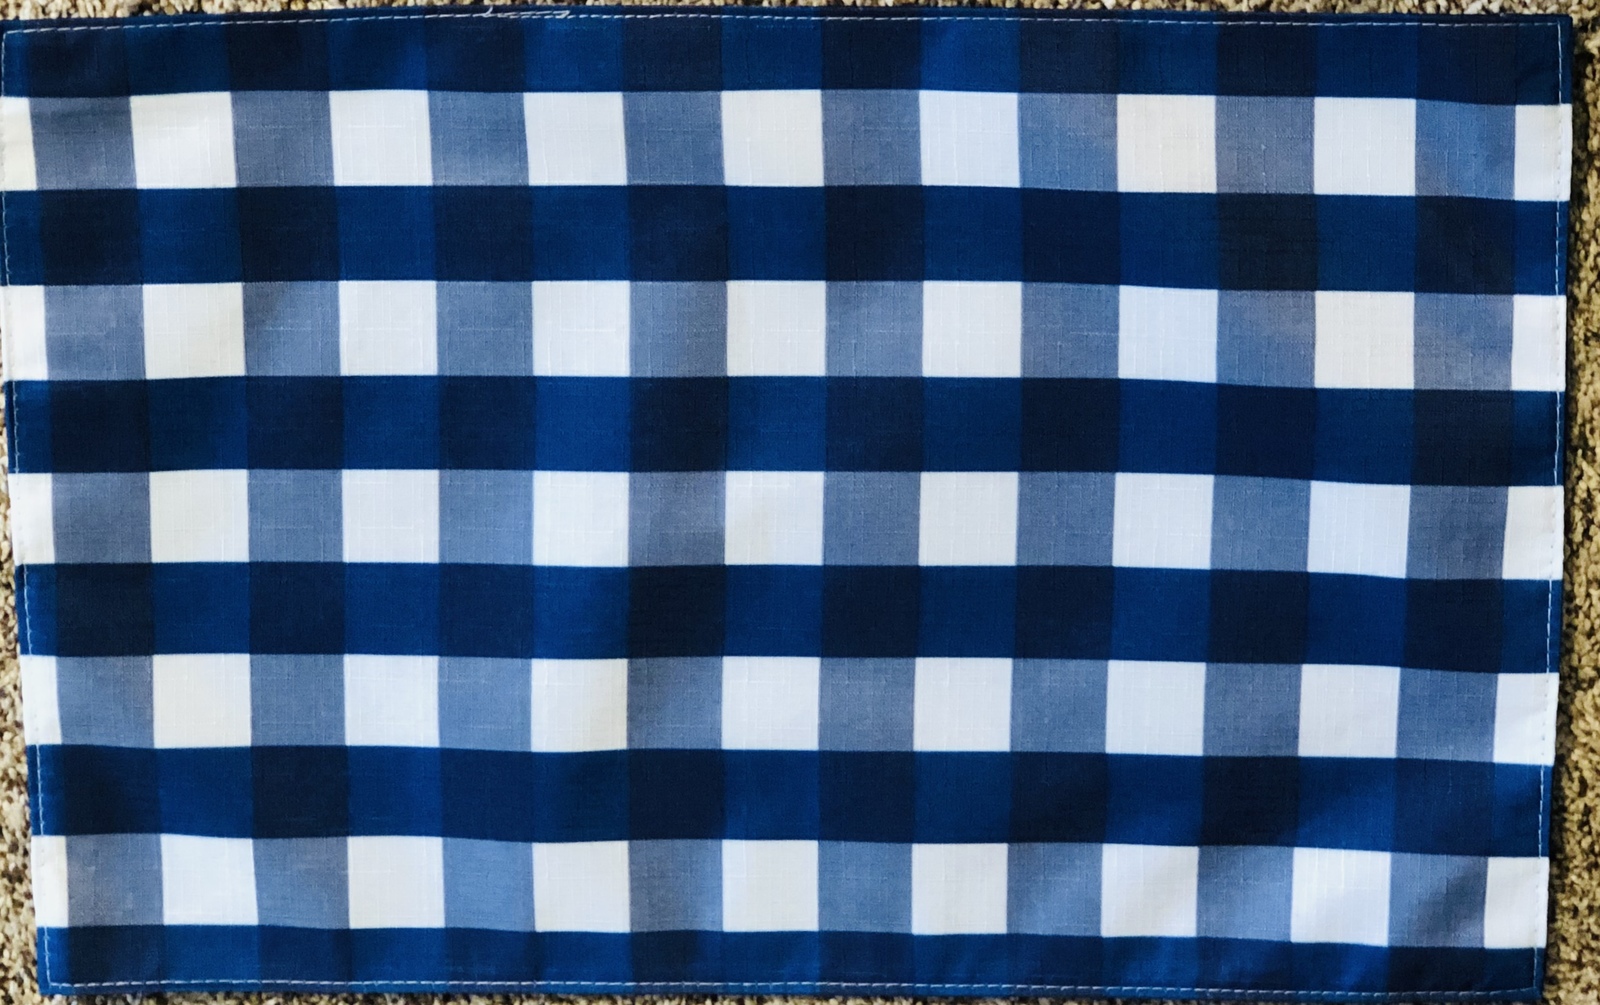 Blue White Gingham Check Plaid 11"x17" Placemat Set of 4 New With Tags - $18.76